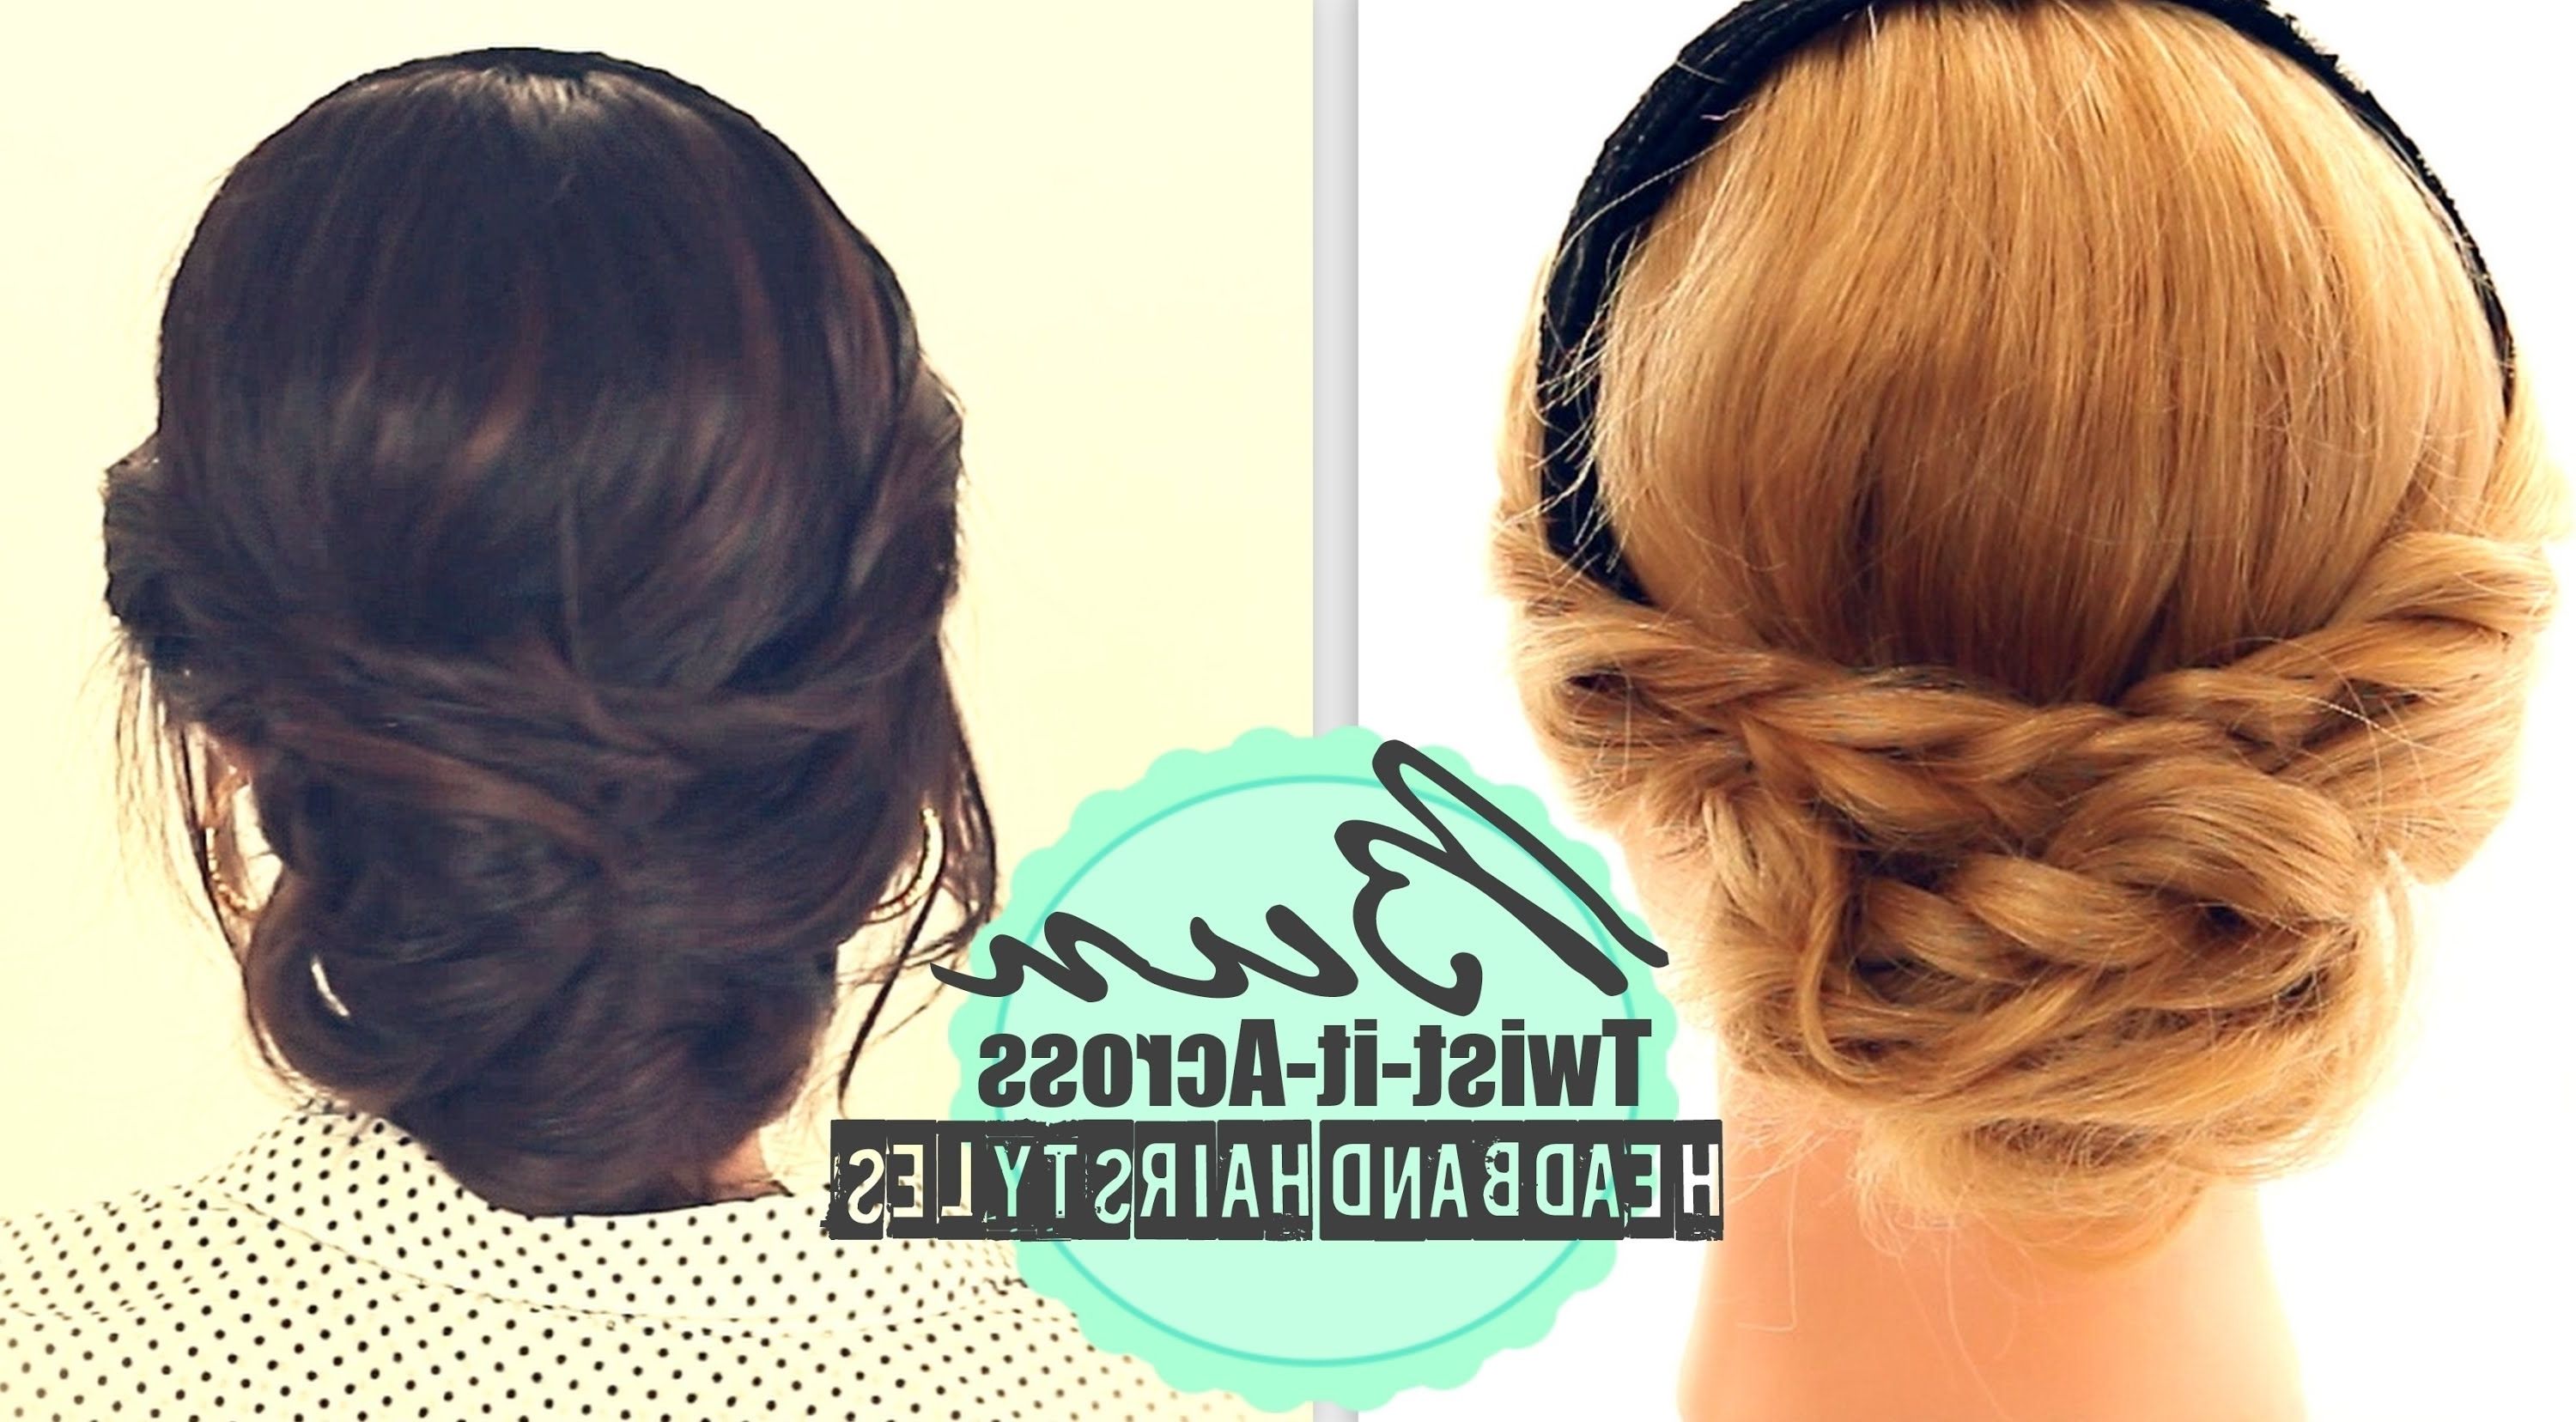 ☆ Cute Headband Hairstyles #2| Everyday Bun Twisted Updo For Medium With Regard To Easy Low Bun Updo Hairstyles (View 6 of 15)